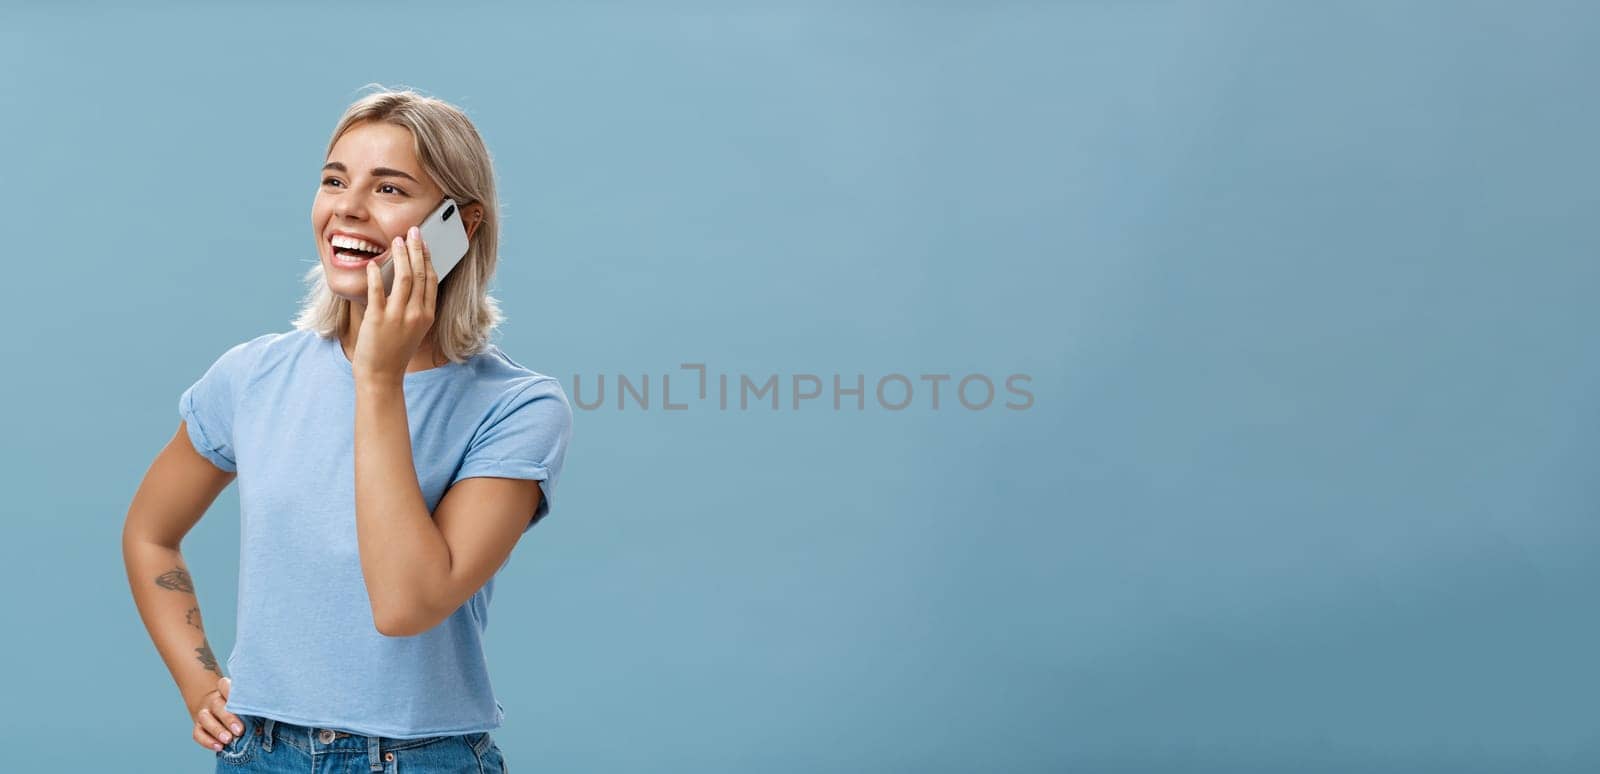 Lifestyle. Waist-up shot of sociable amused and happy attractive caucasian fair-haired woman in casual t-shirt standing half-turned gazing left with hand on hip while talking on smartphone over blue background.